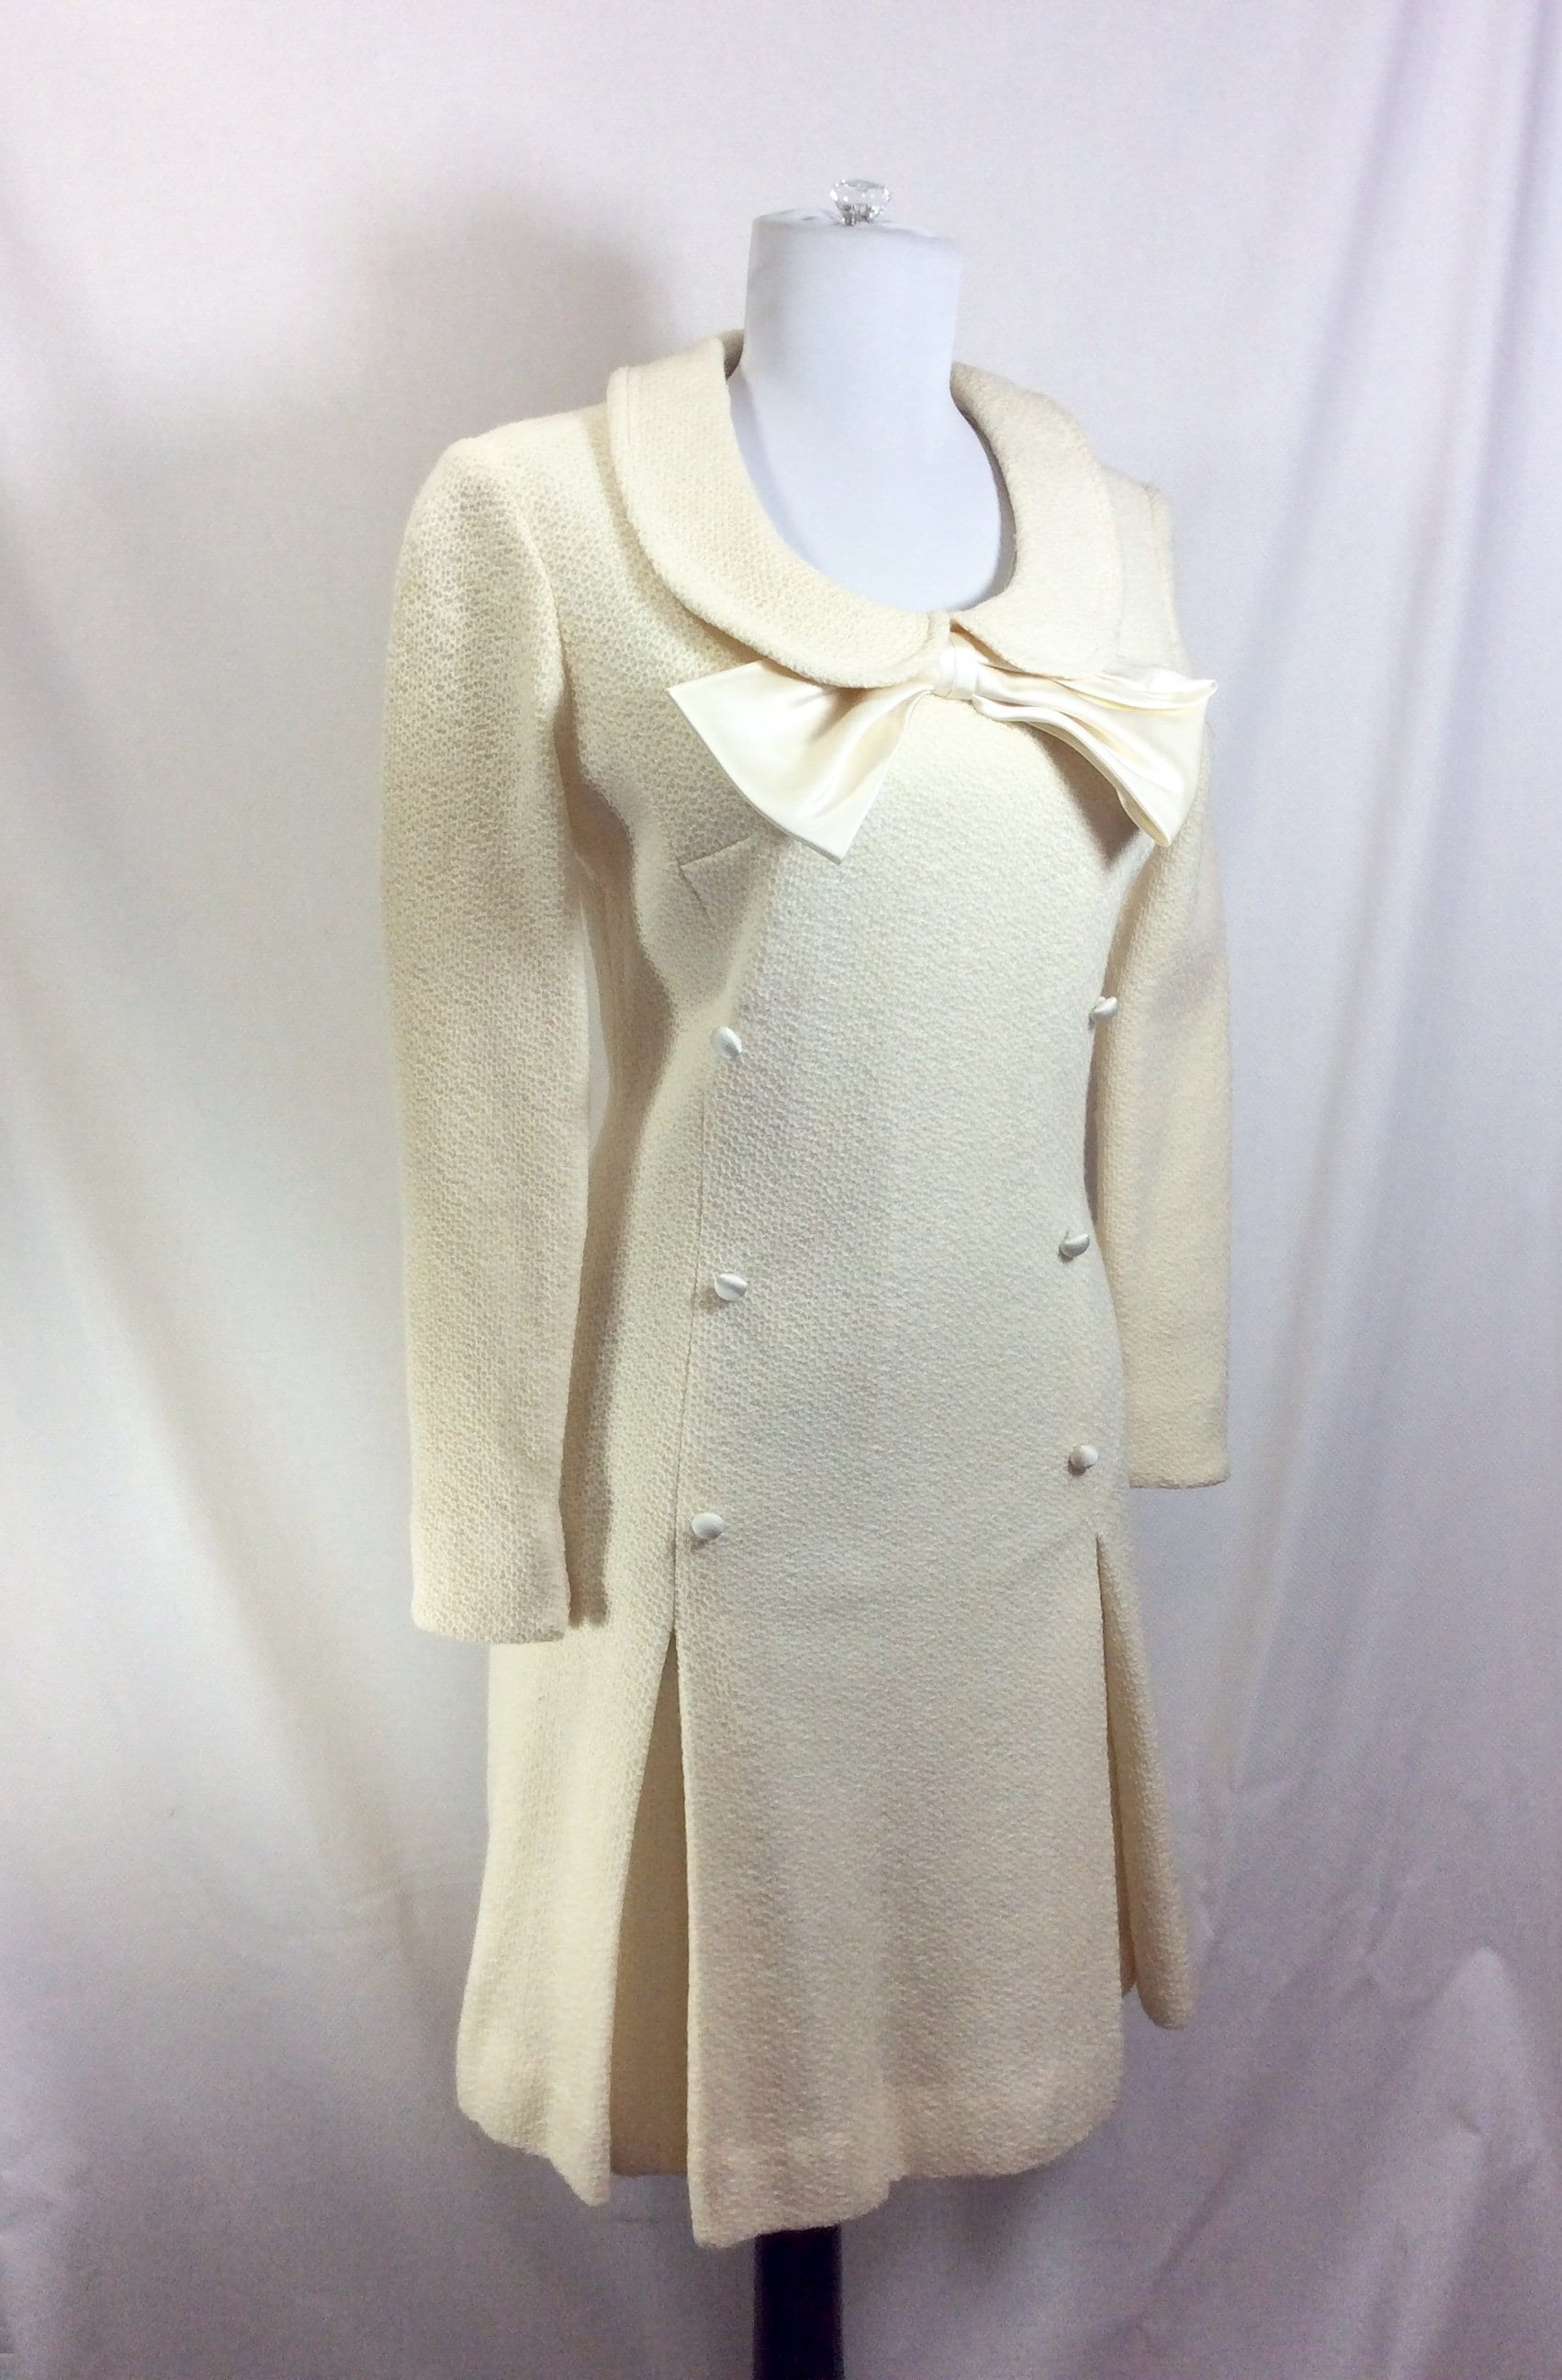 1960s Wool Ivory Minidress with Peter Pan Collar and Satin Bow | Etsy